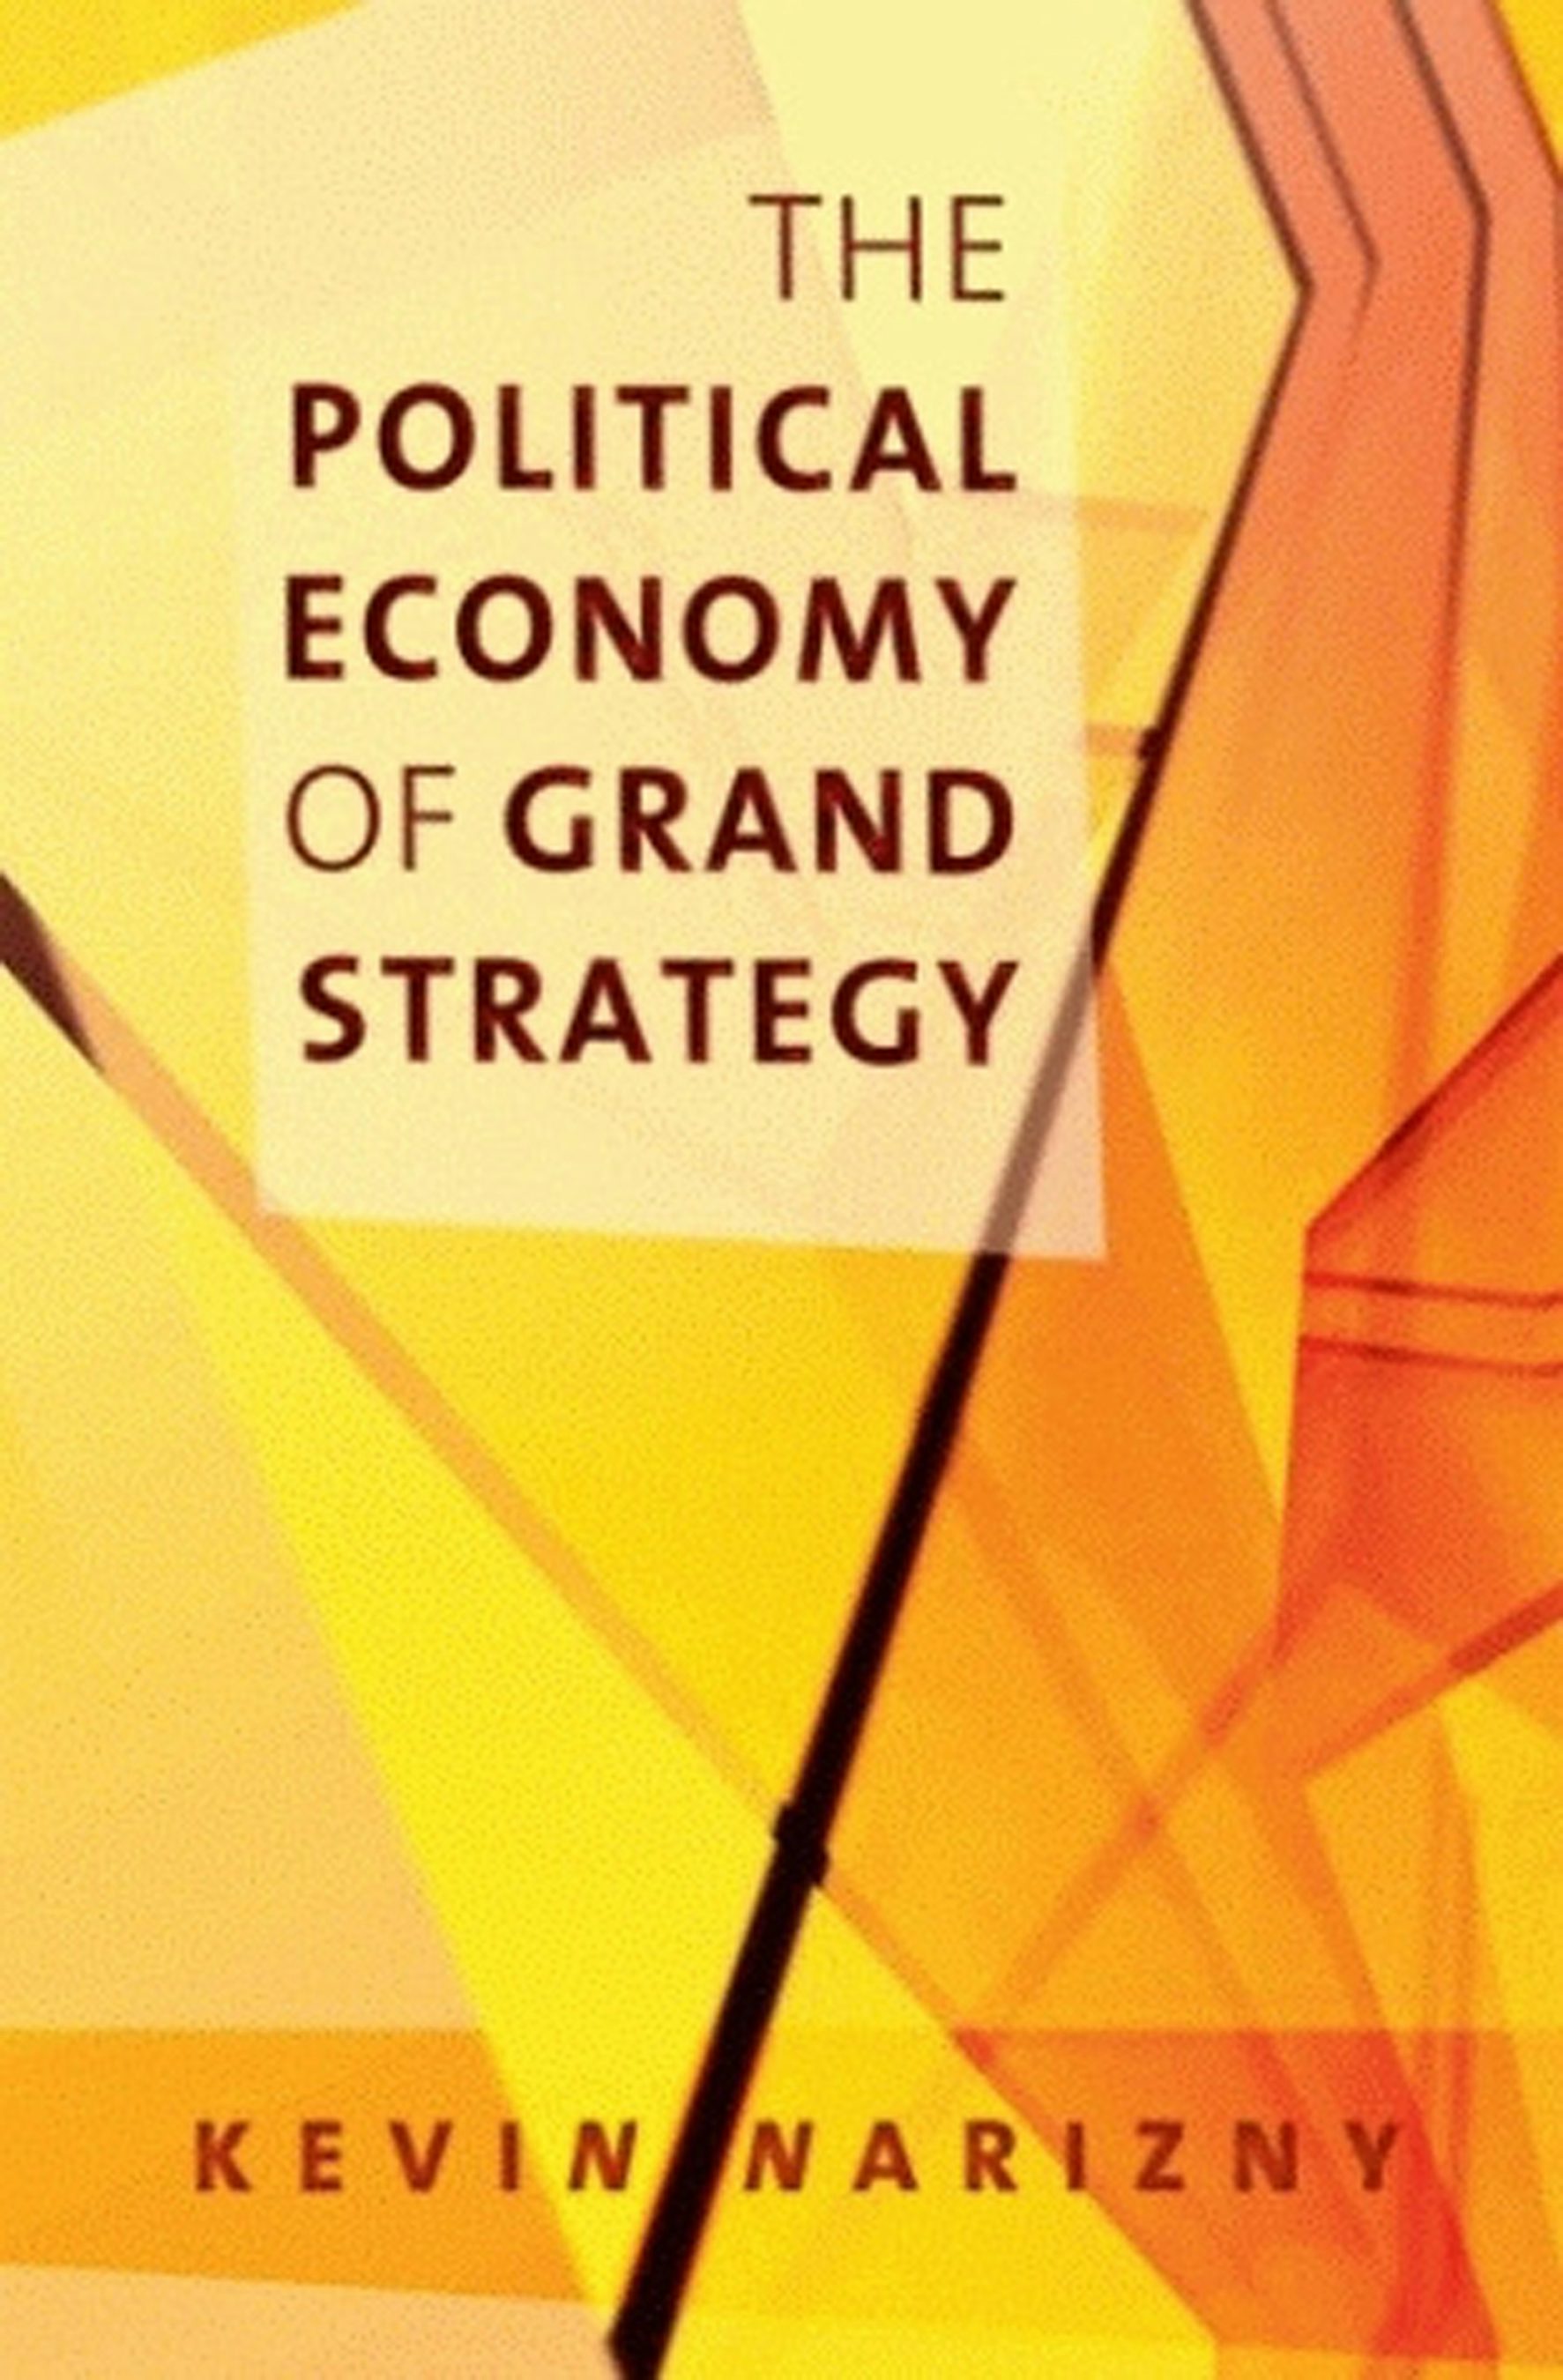 The Political Economy of Grand Strategy by Kevin Narizny 